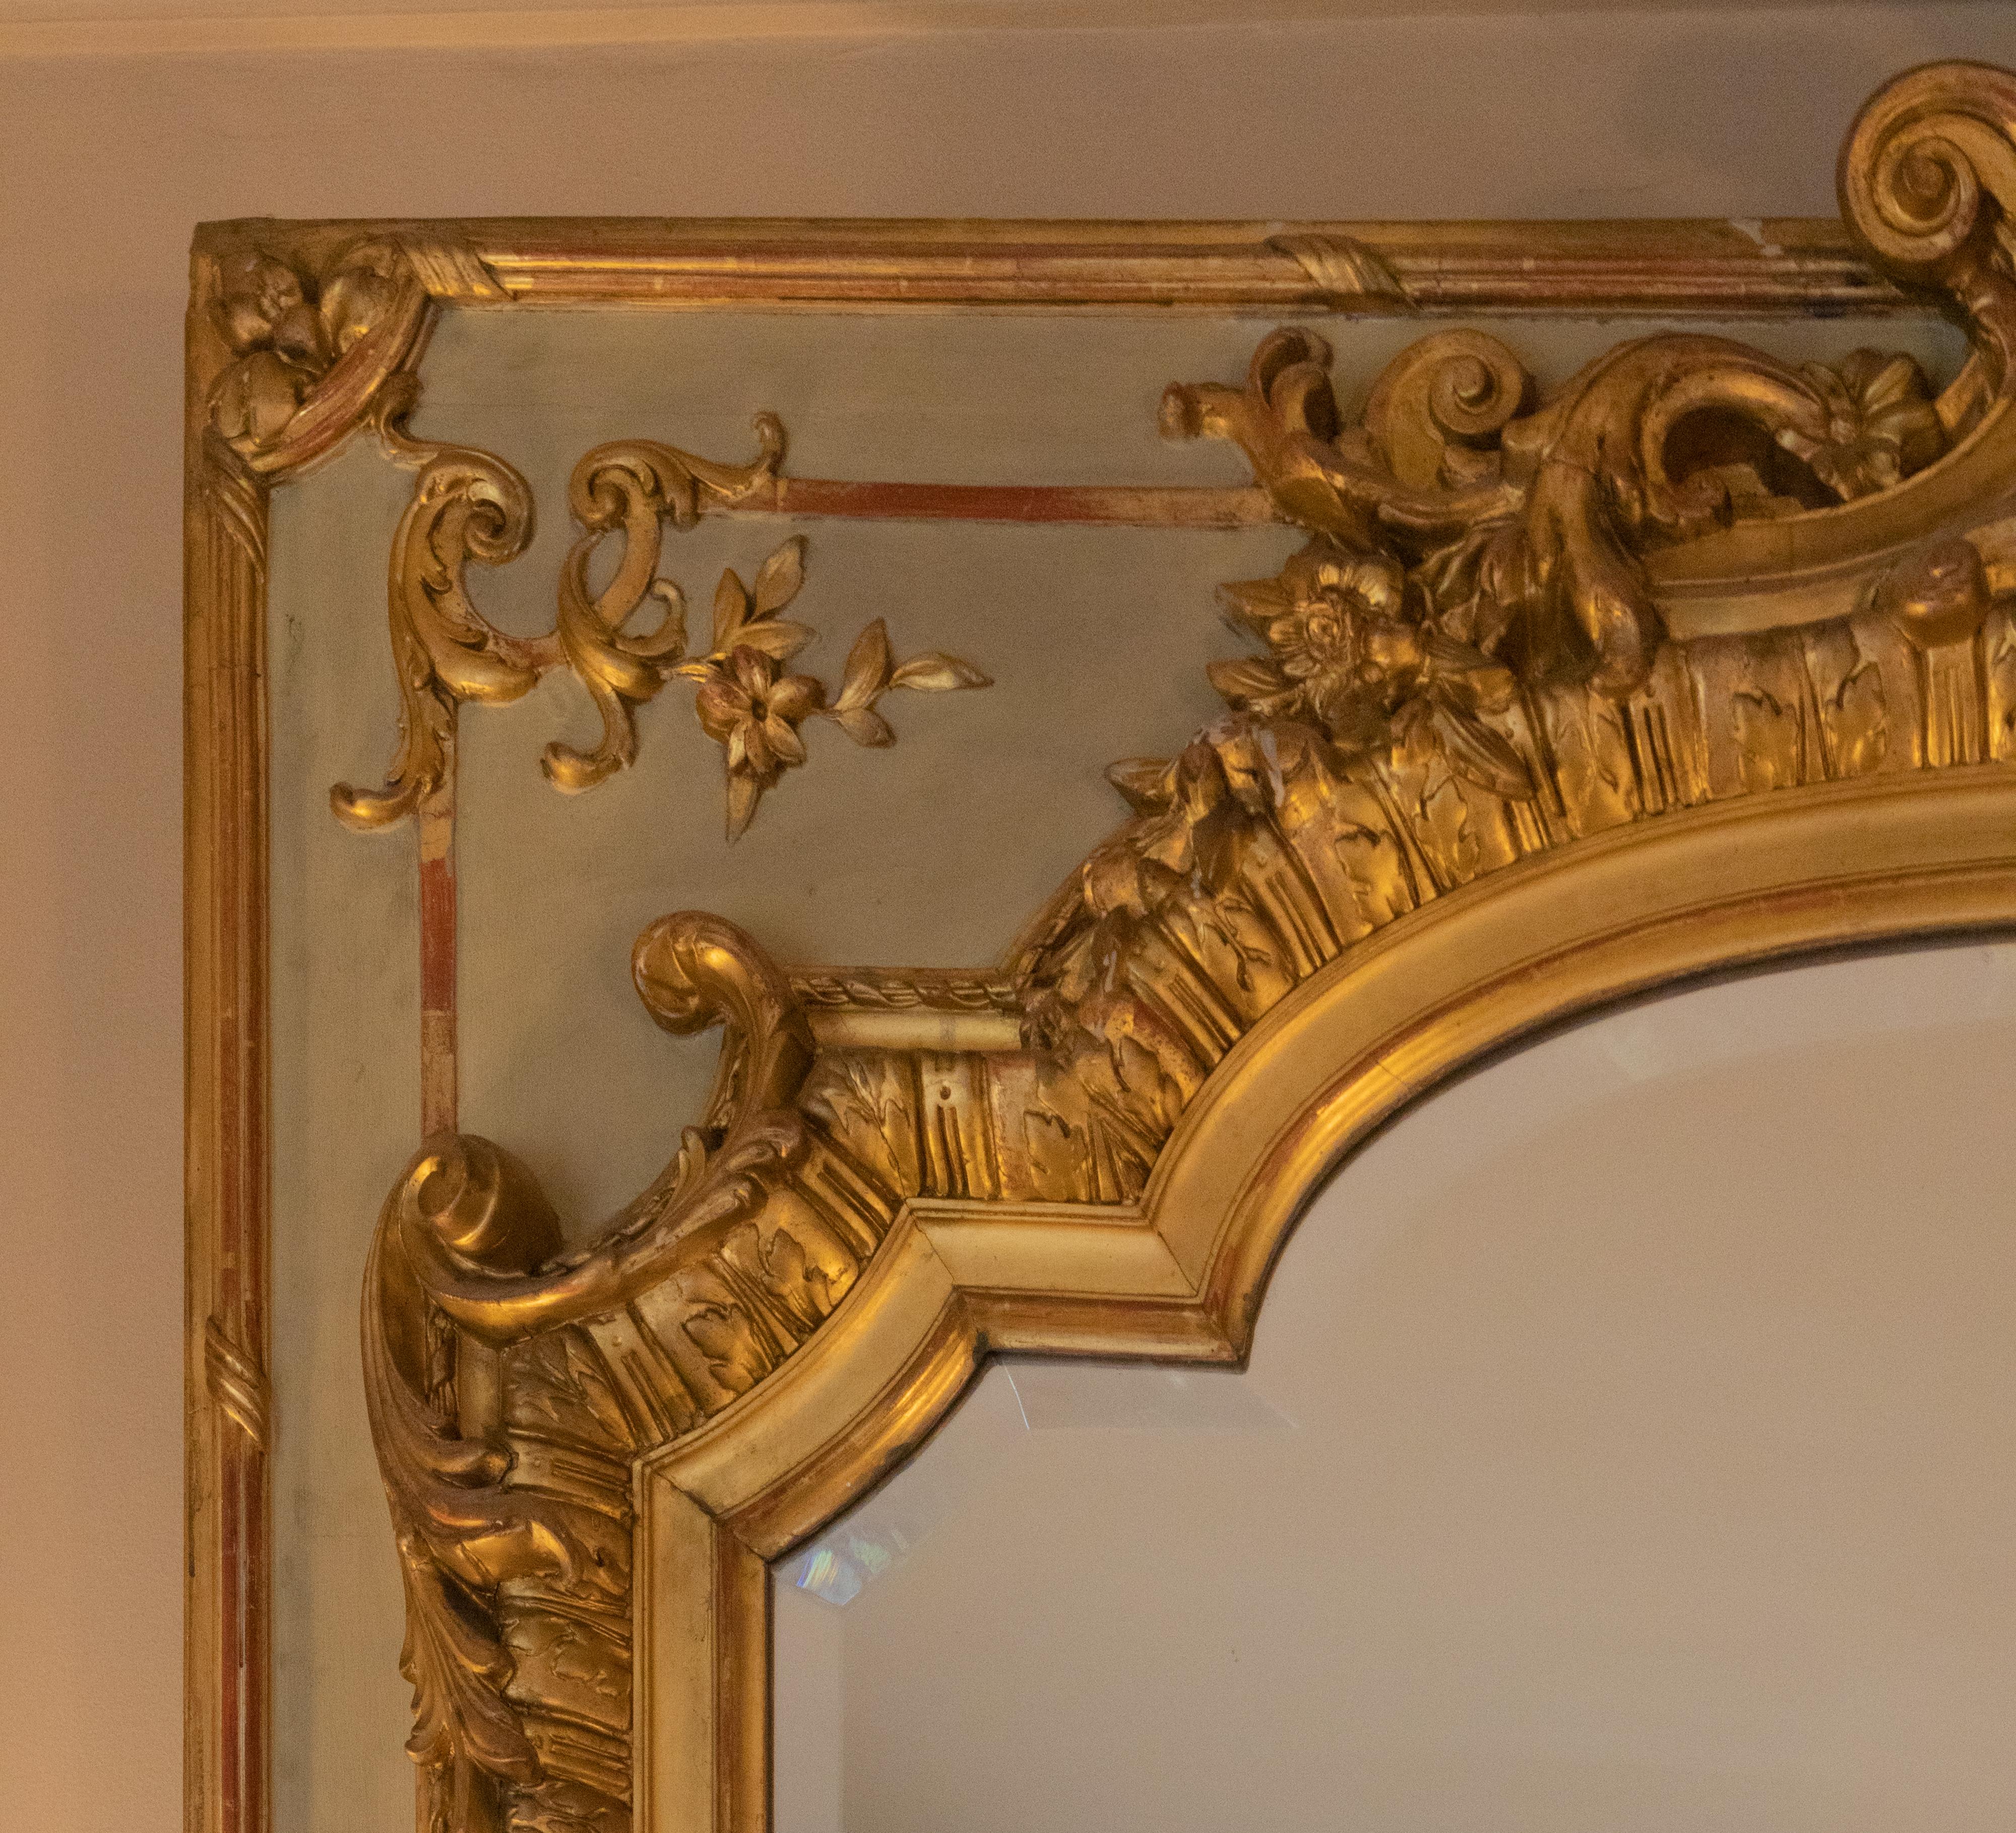 A beautiful Tremeau 19th Century mirror painted and with gilded parceling, rectangular mirror in a greenish-gray rectangular frame and stucco decoration in gold leaf, rococo motifs and reliefs such as rolled acanthus leaves, foliage and rope